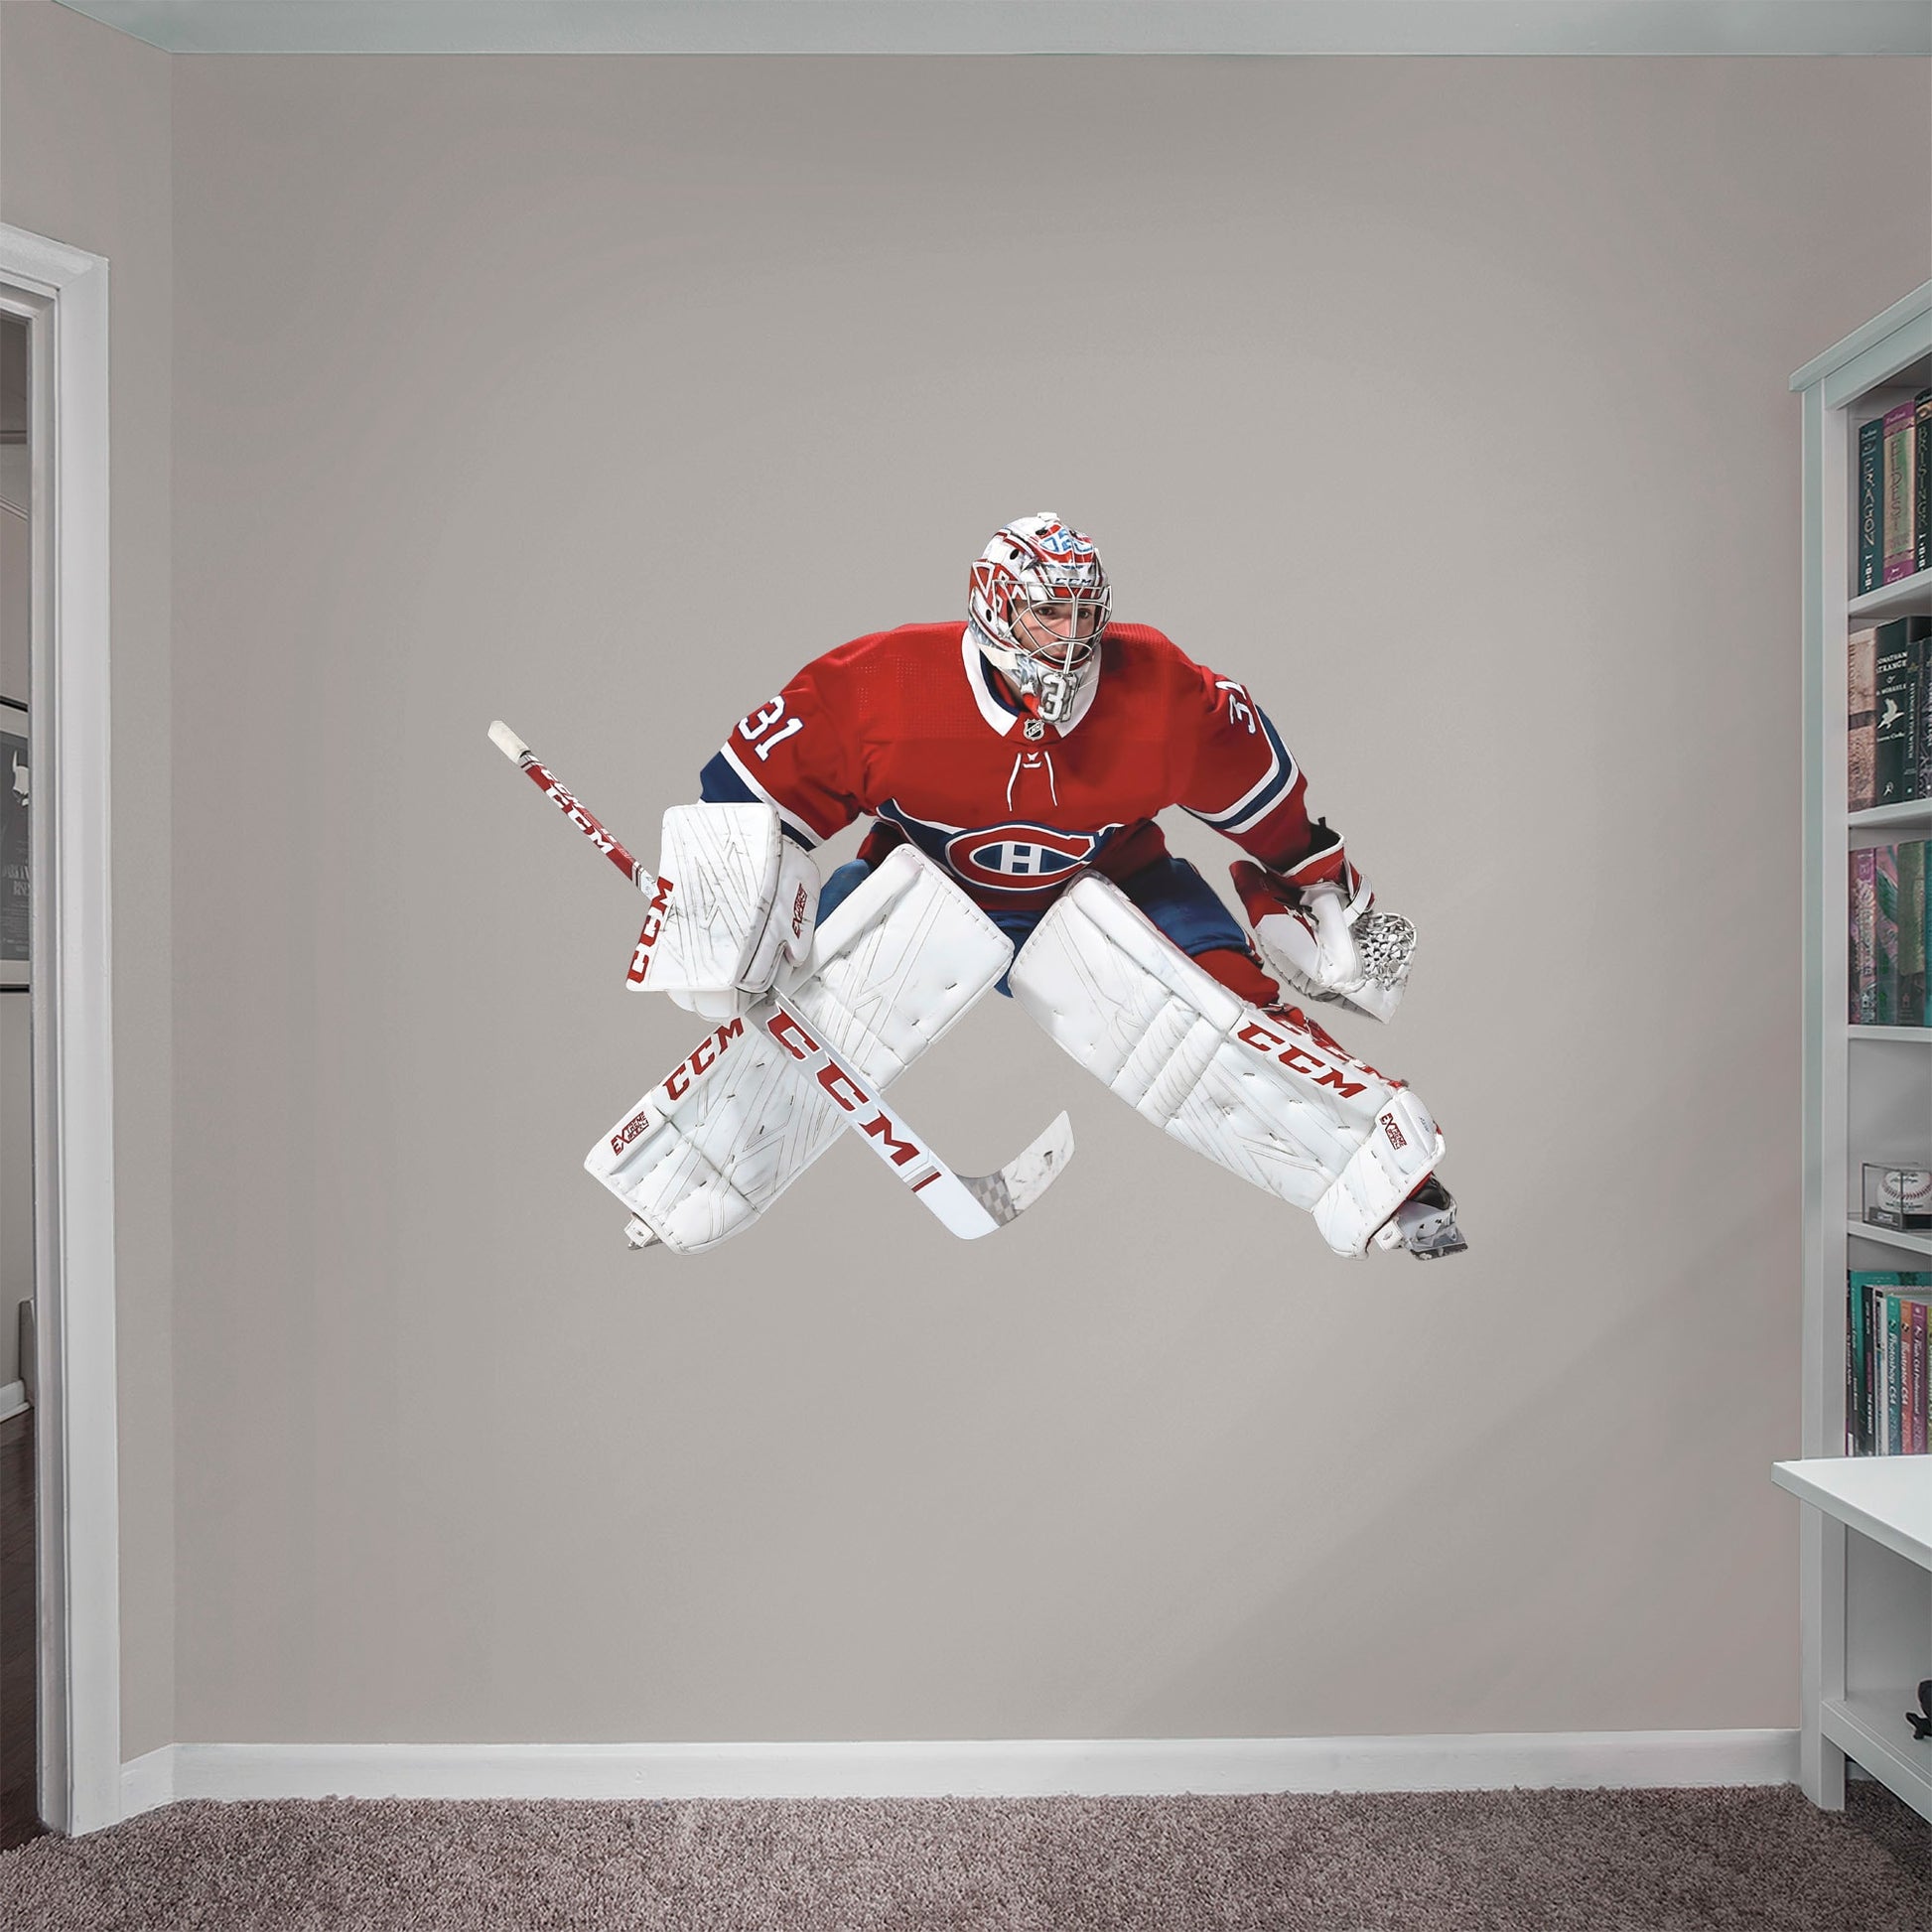 Giant Athlete + 2 Team Decals (50"W x 38"H) Featuring the repeat NHL All-Star - widely considered the greatest goaltender in the world - tending the goal in his trademark butterfly style, this reusable, high-quality decal resists rips, tears, and scoring attempts - and it won't damage the walls.